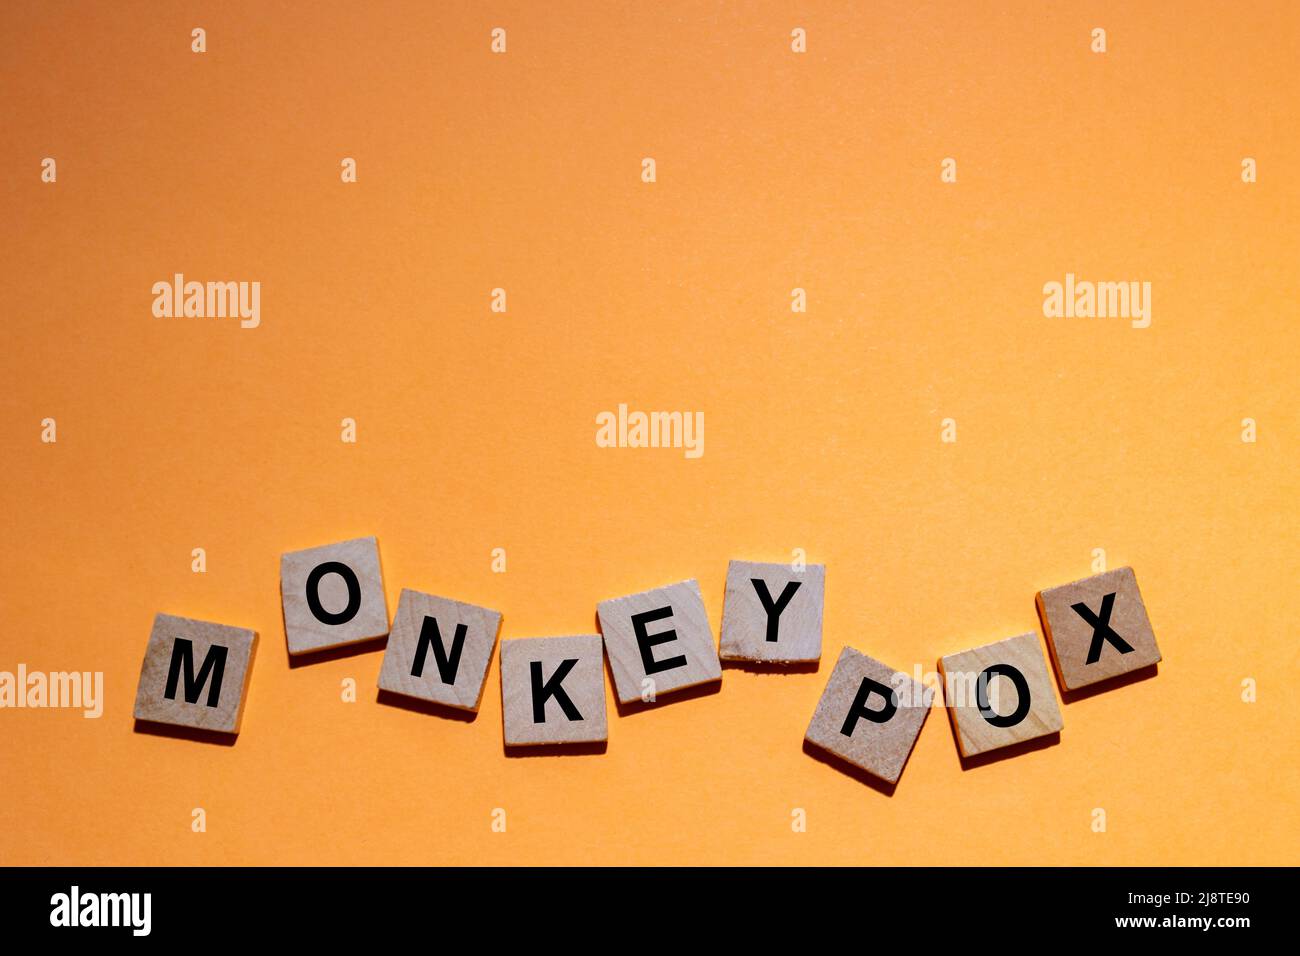 MONKEYPOX. Word written on square wooden tiles with an orange background. Monkeypox is a zoonotic viral disease that can infect nonhuman primates Stock Photo